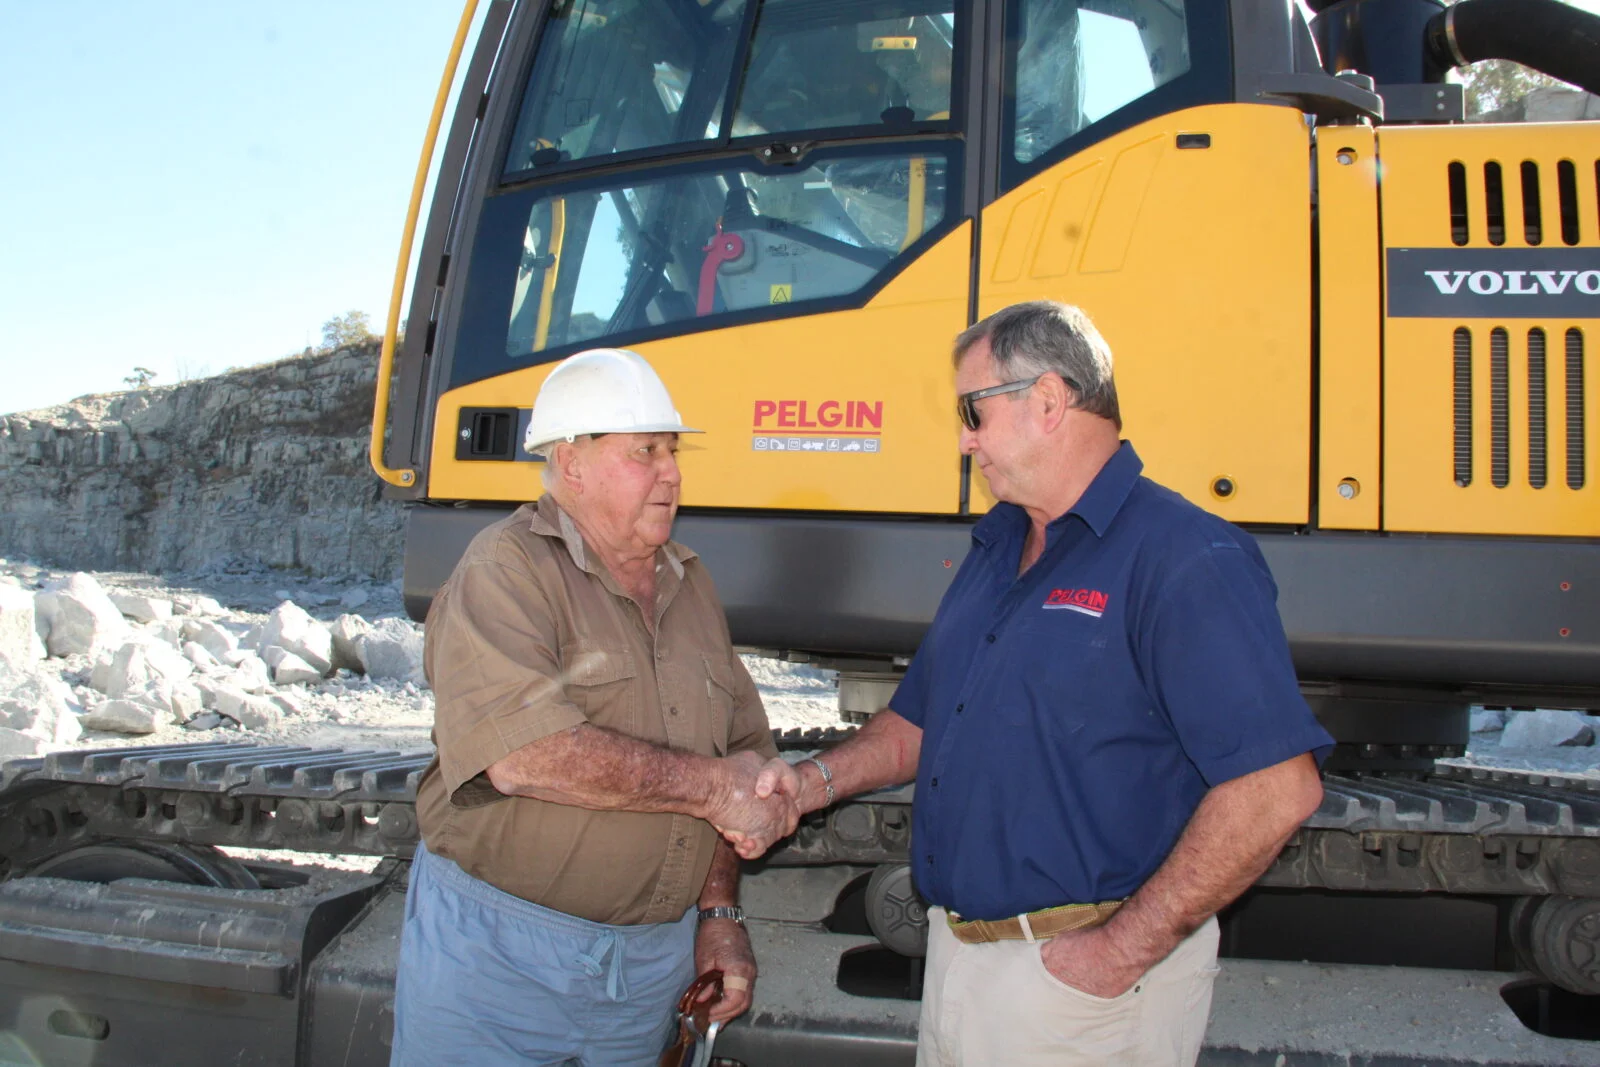 Pomona Quarries acquires Zim’s largest hydraulic hammers from Pelgin